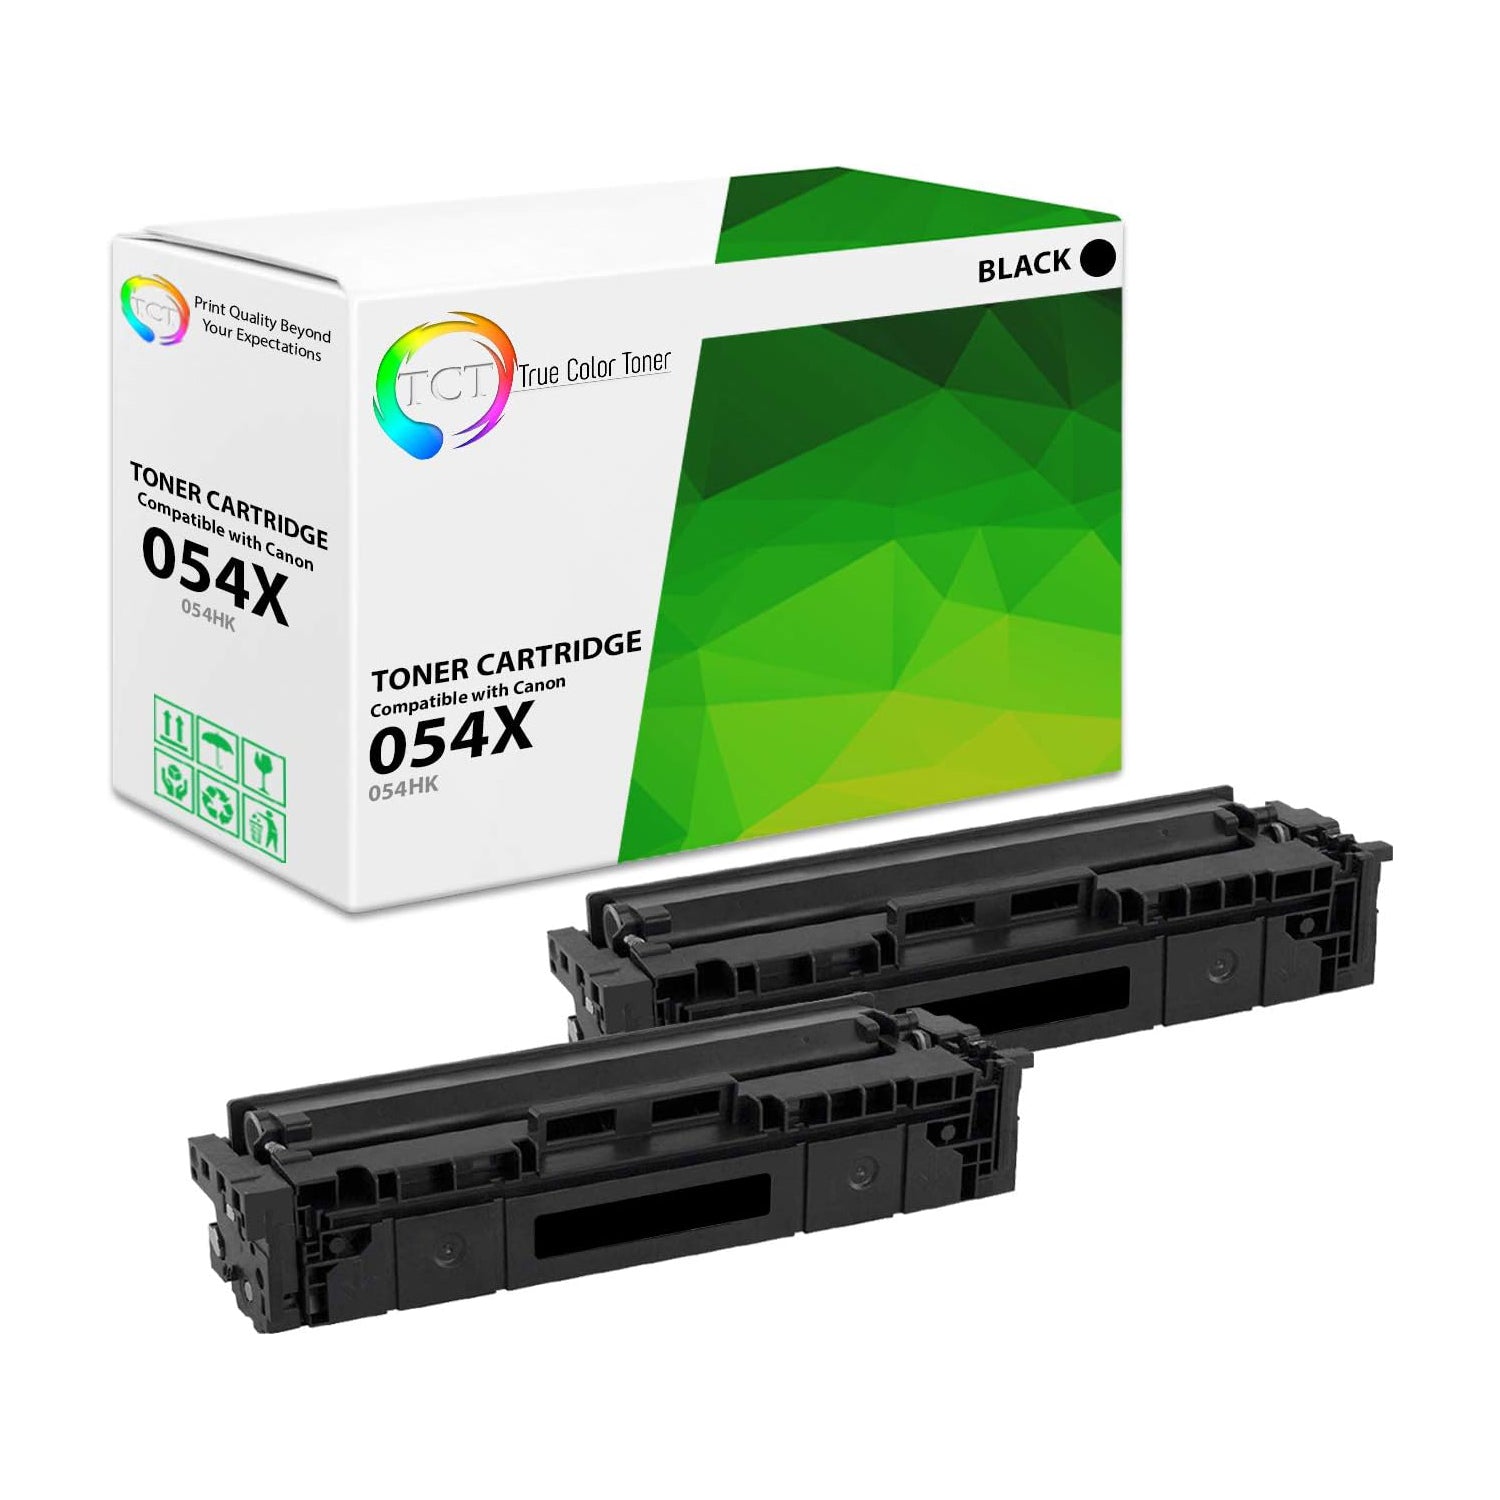 TCT Compatible High Yield Toner Cartridge Replacement for the Canon 054 Series - 2 Pack Black